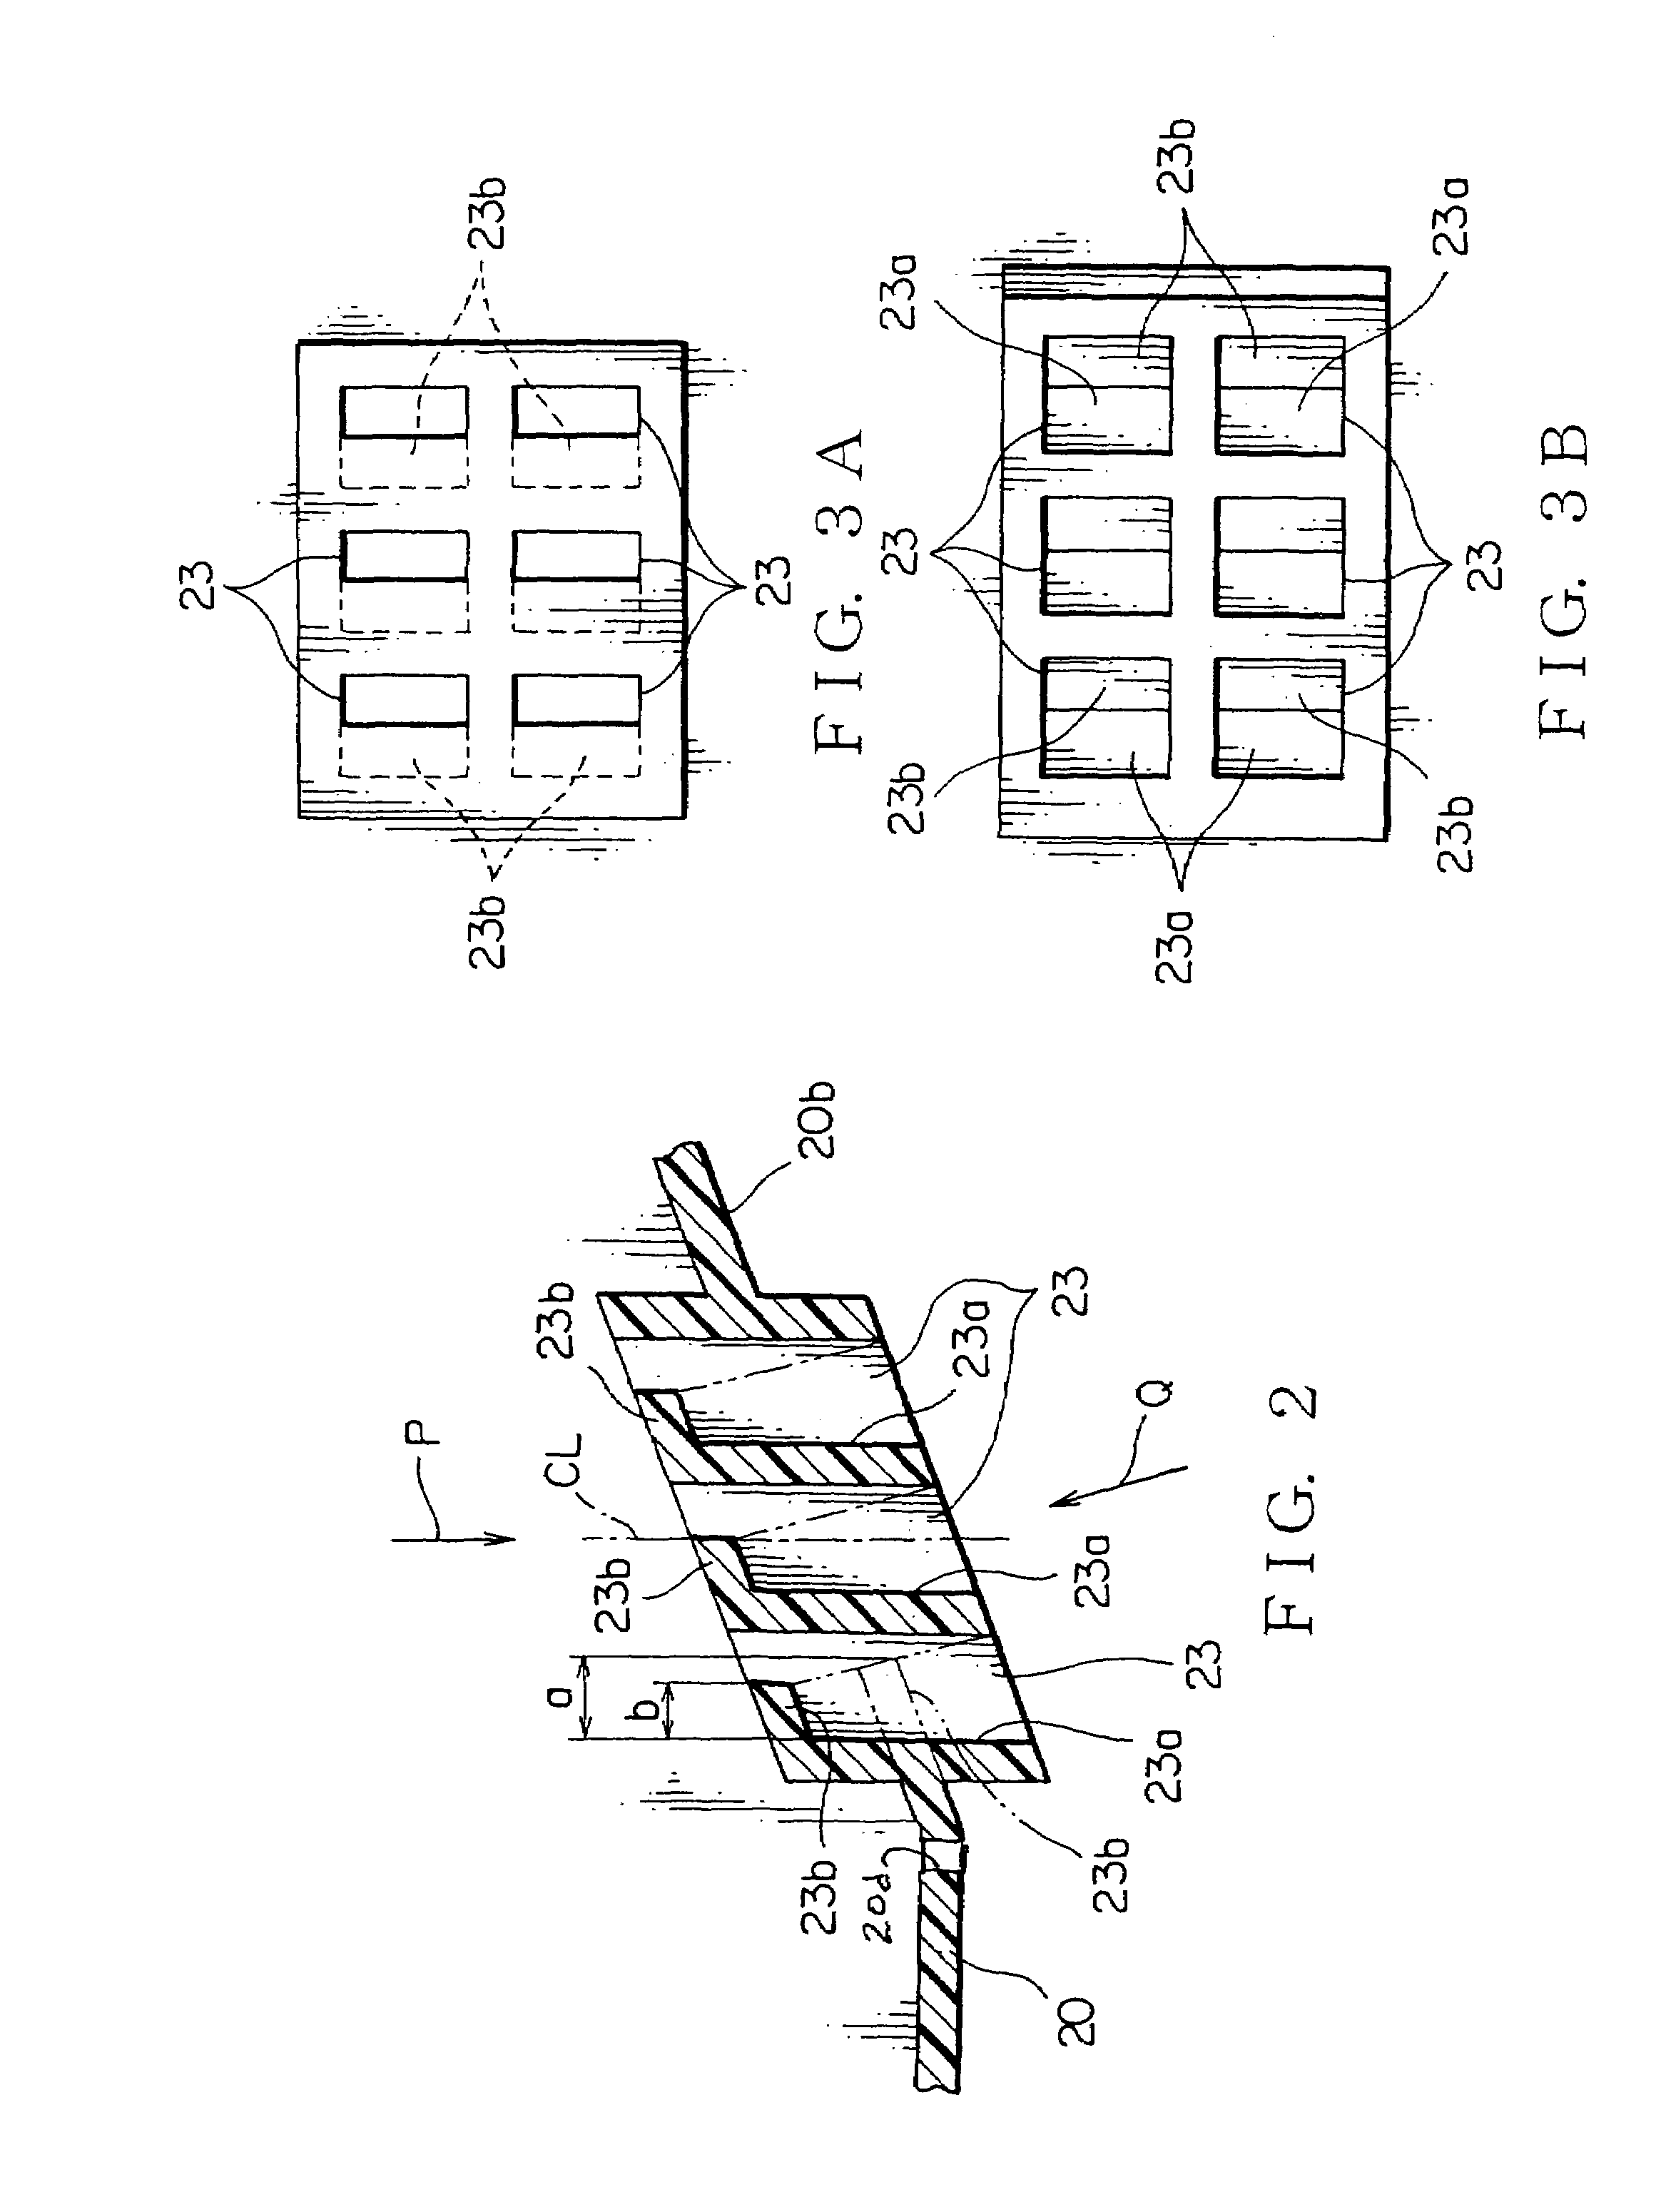 Waterproof structure of junction box